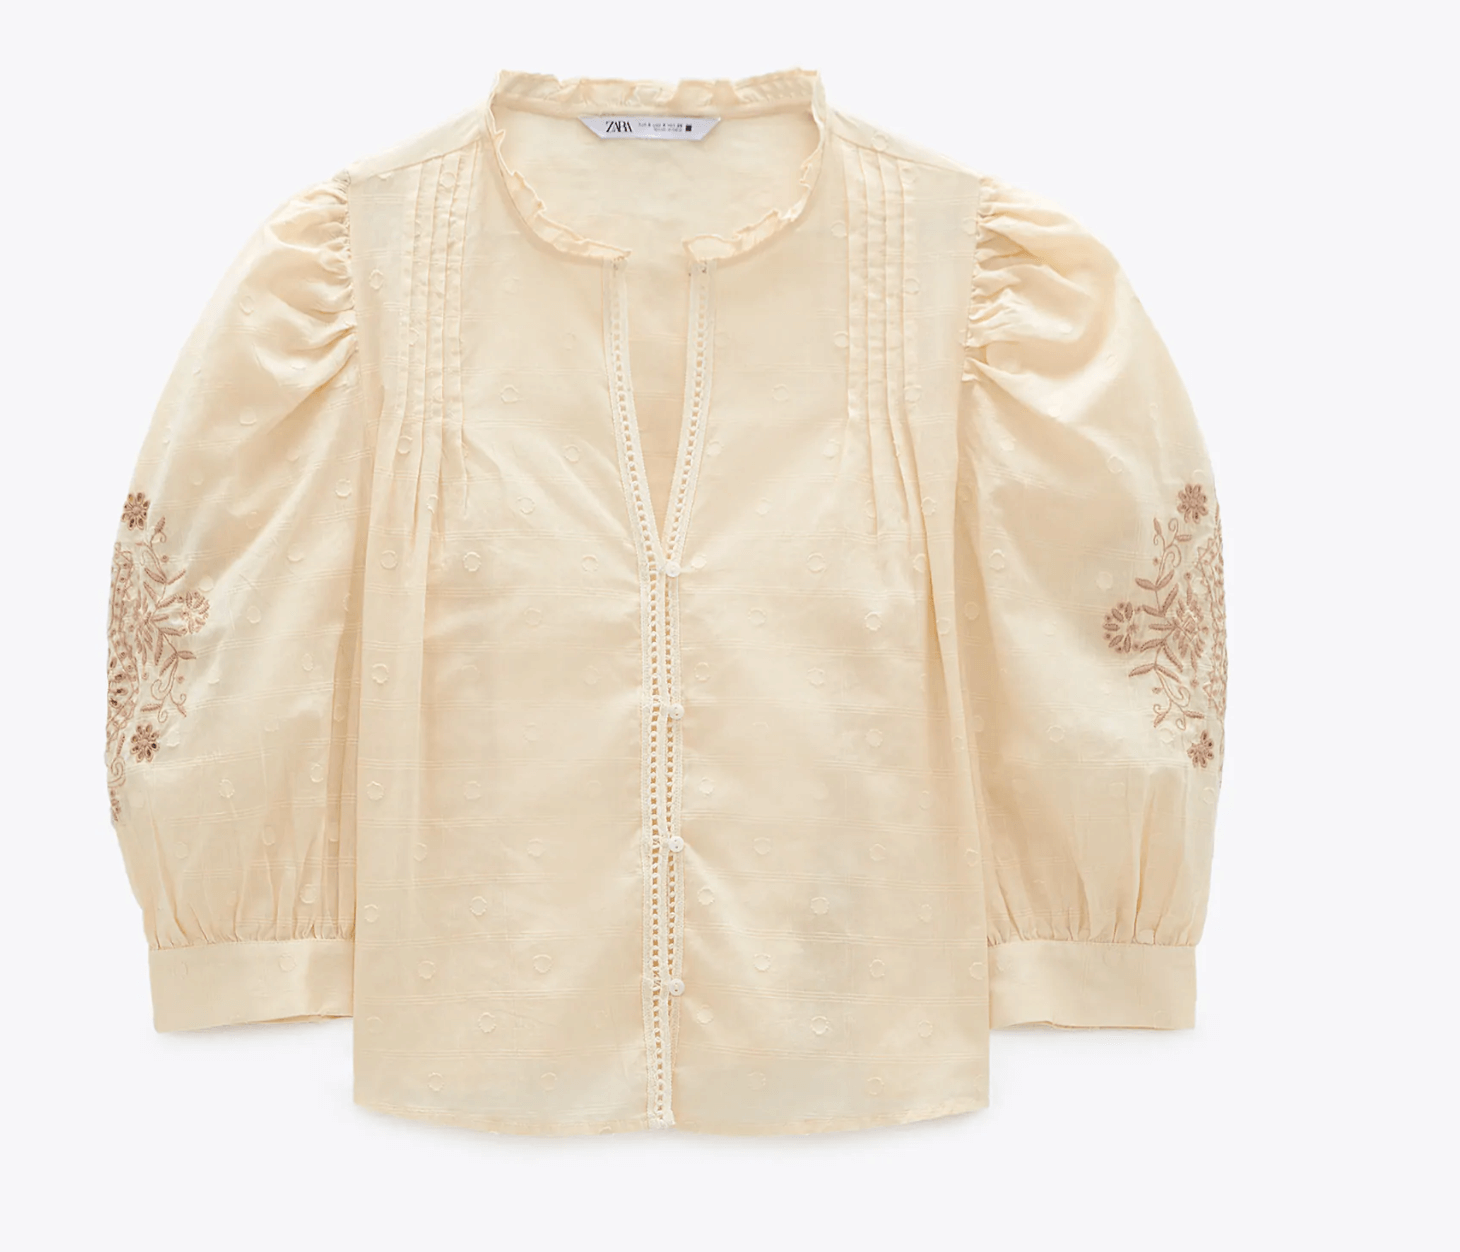 Blouse with Embroidered Sleeves by Zara